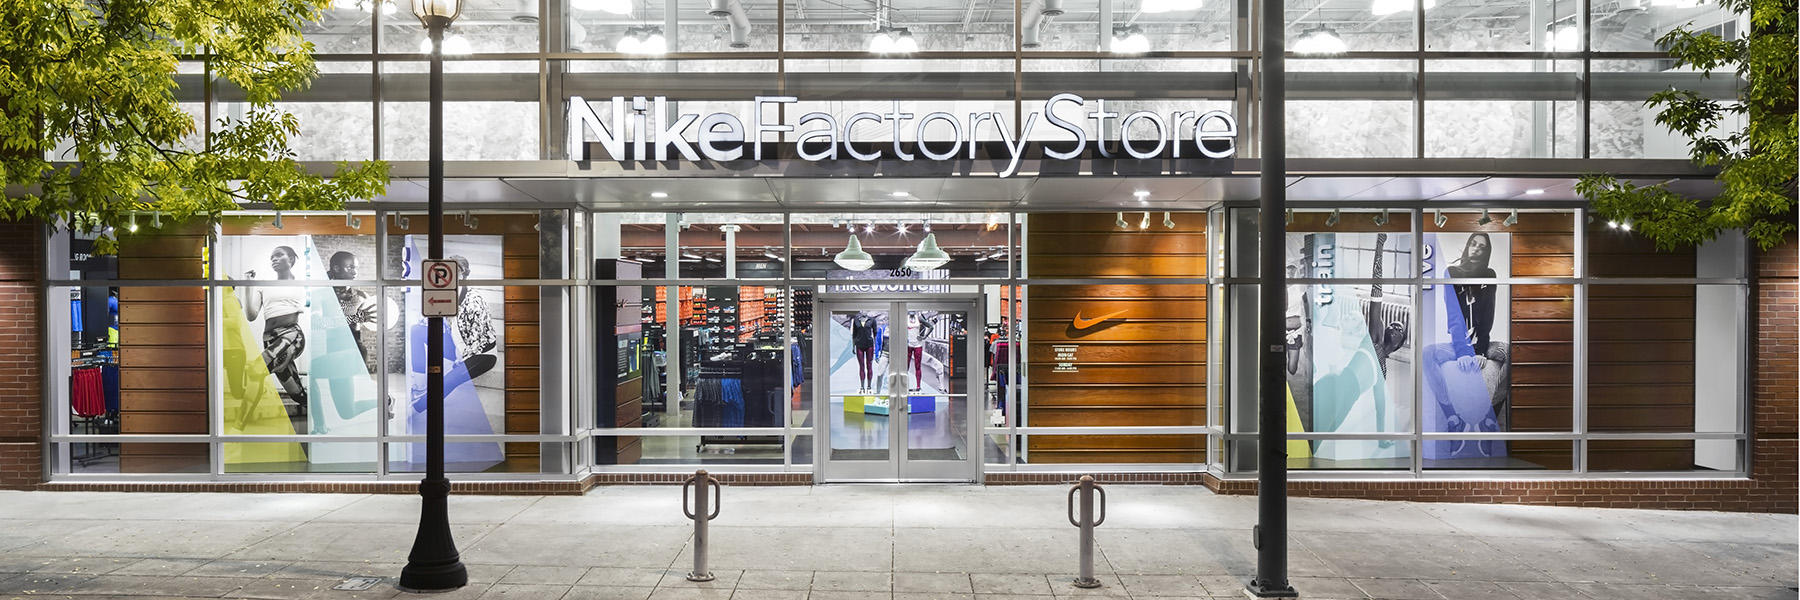 nike factory store martin luther king